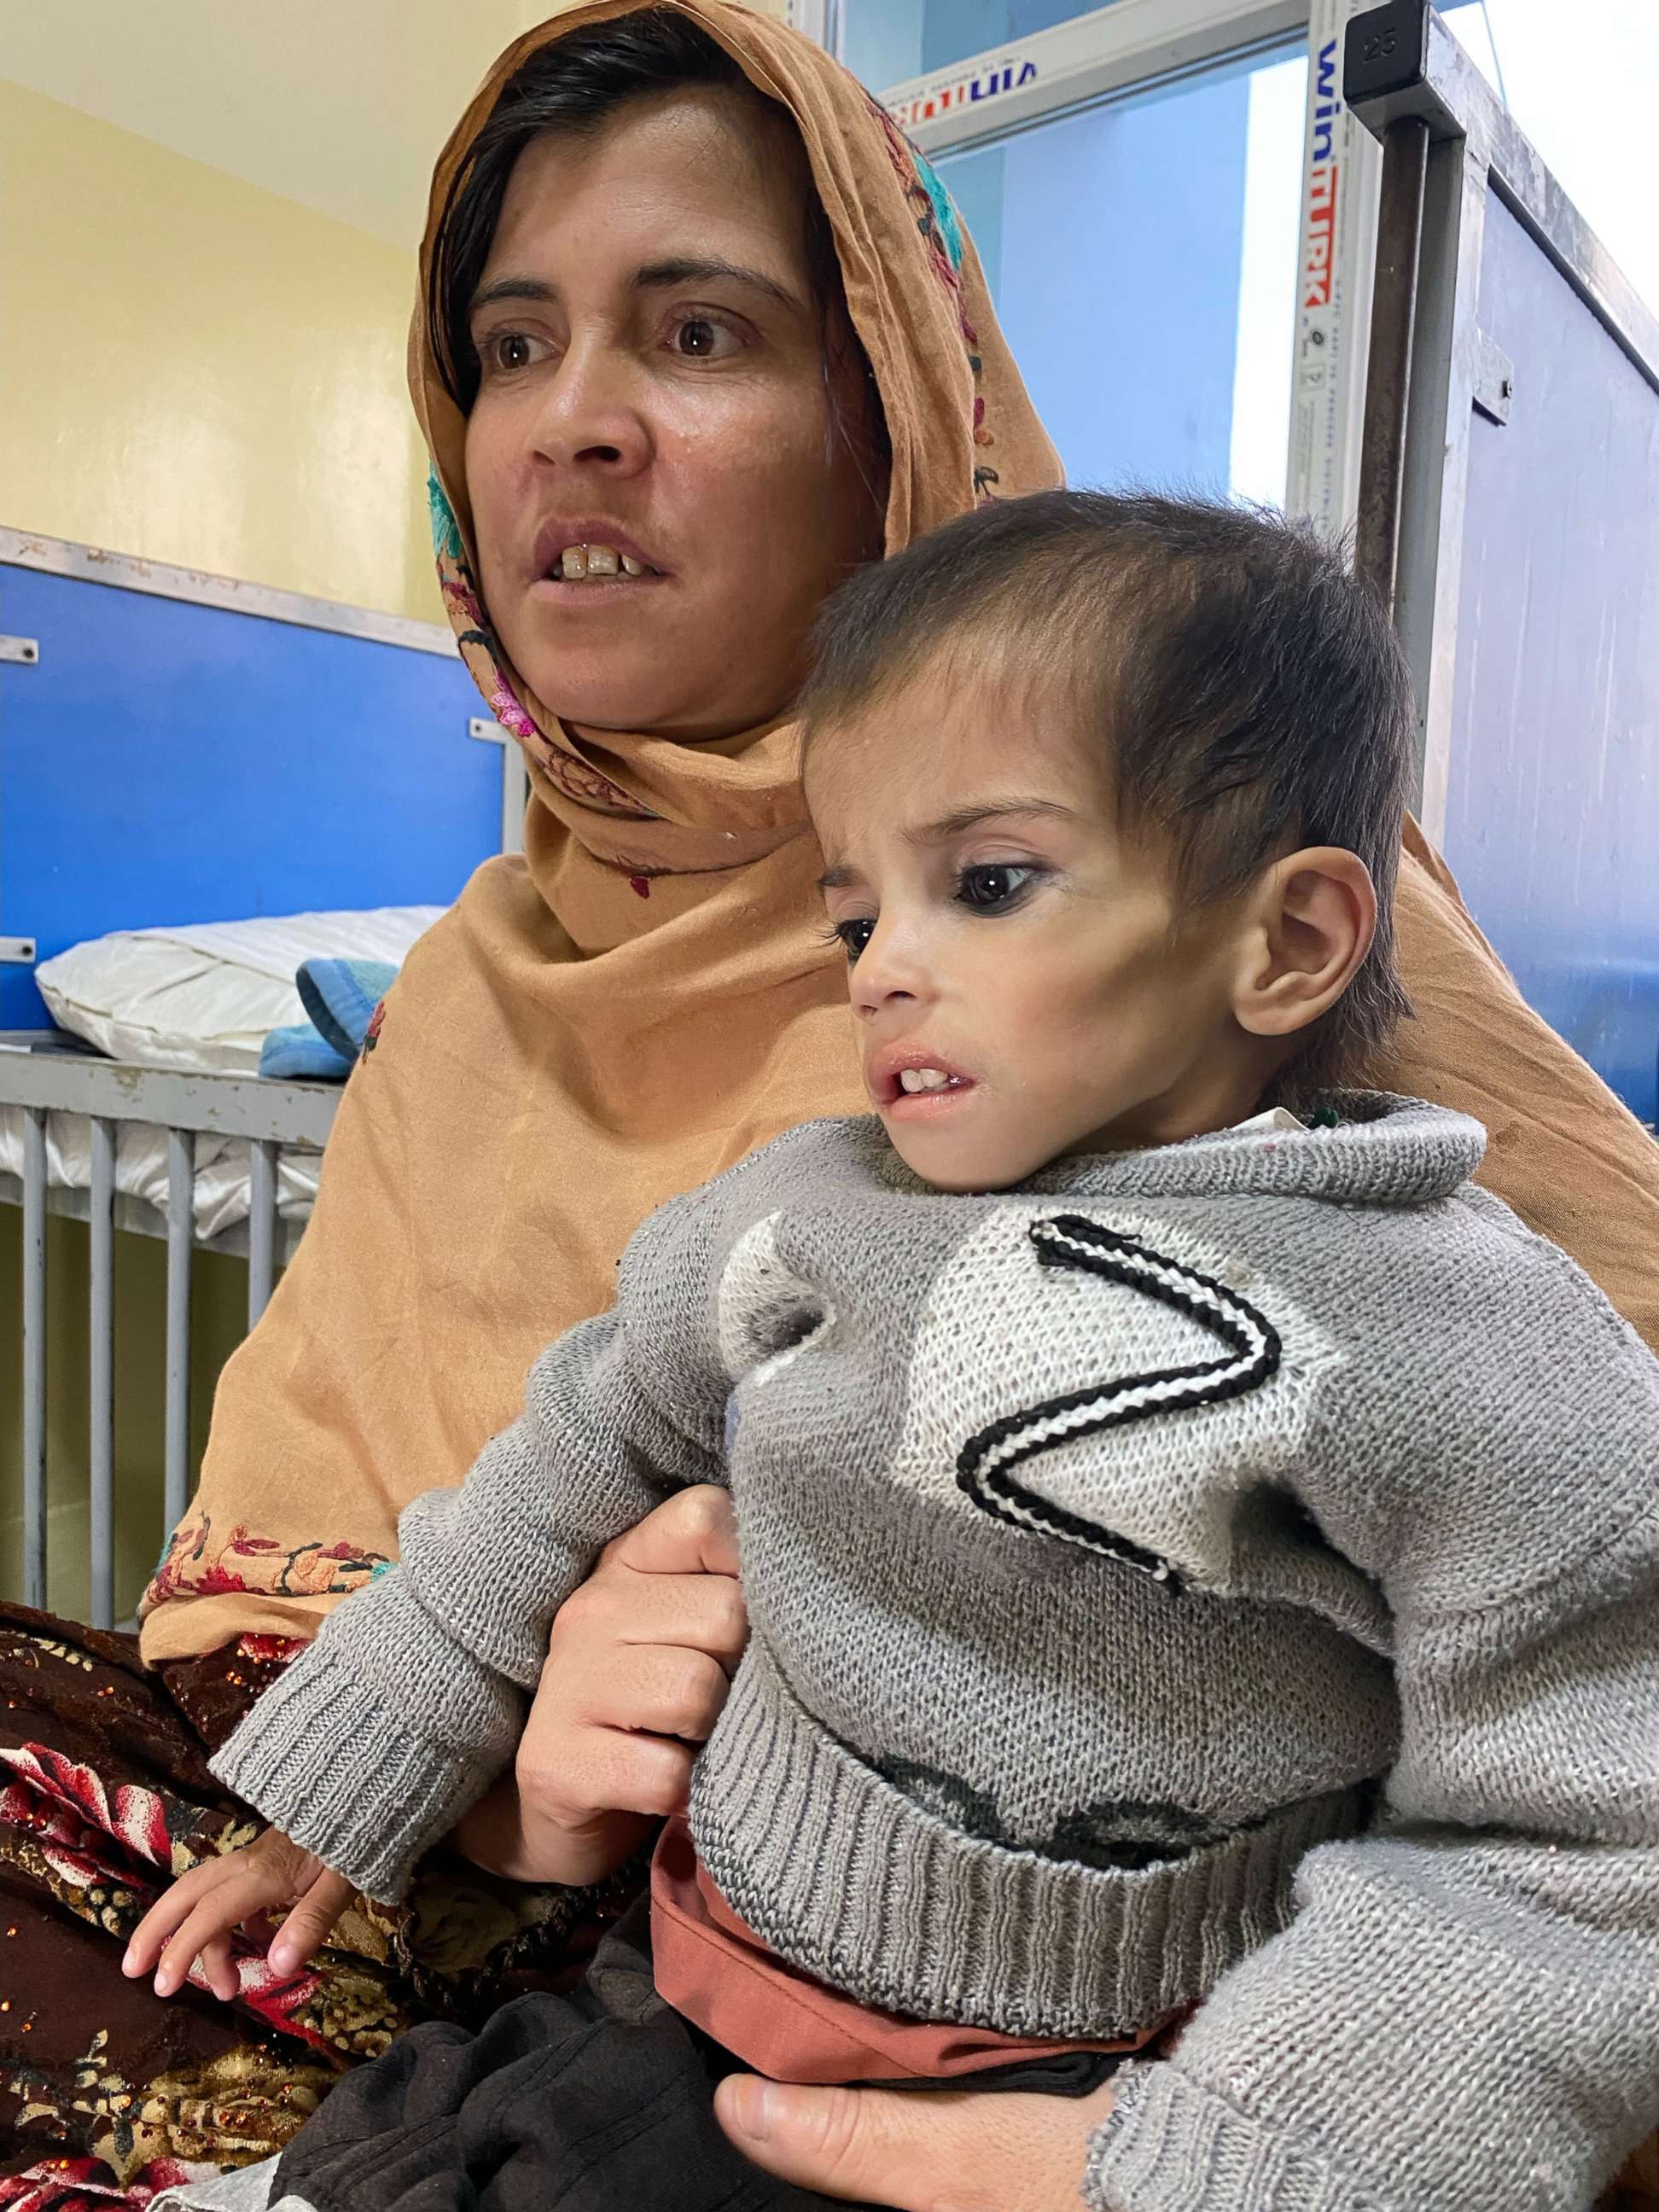 PHOTO: Two-year-old Mohammed weighs just 11 lbs.